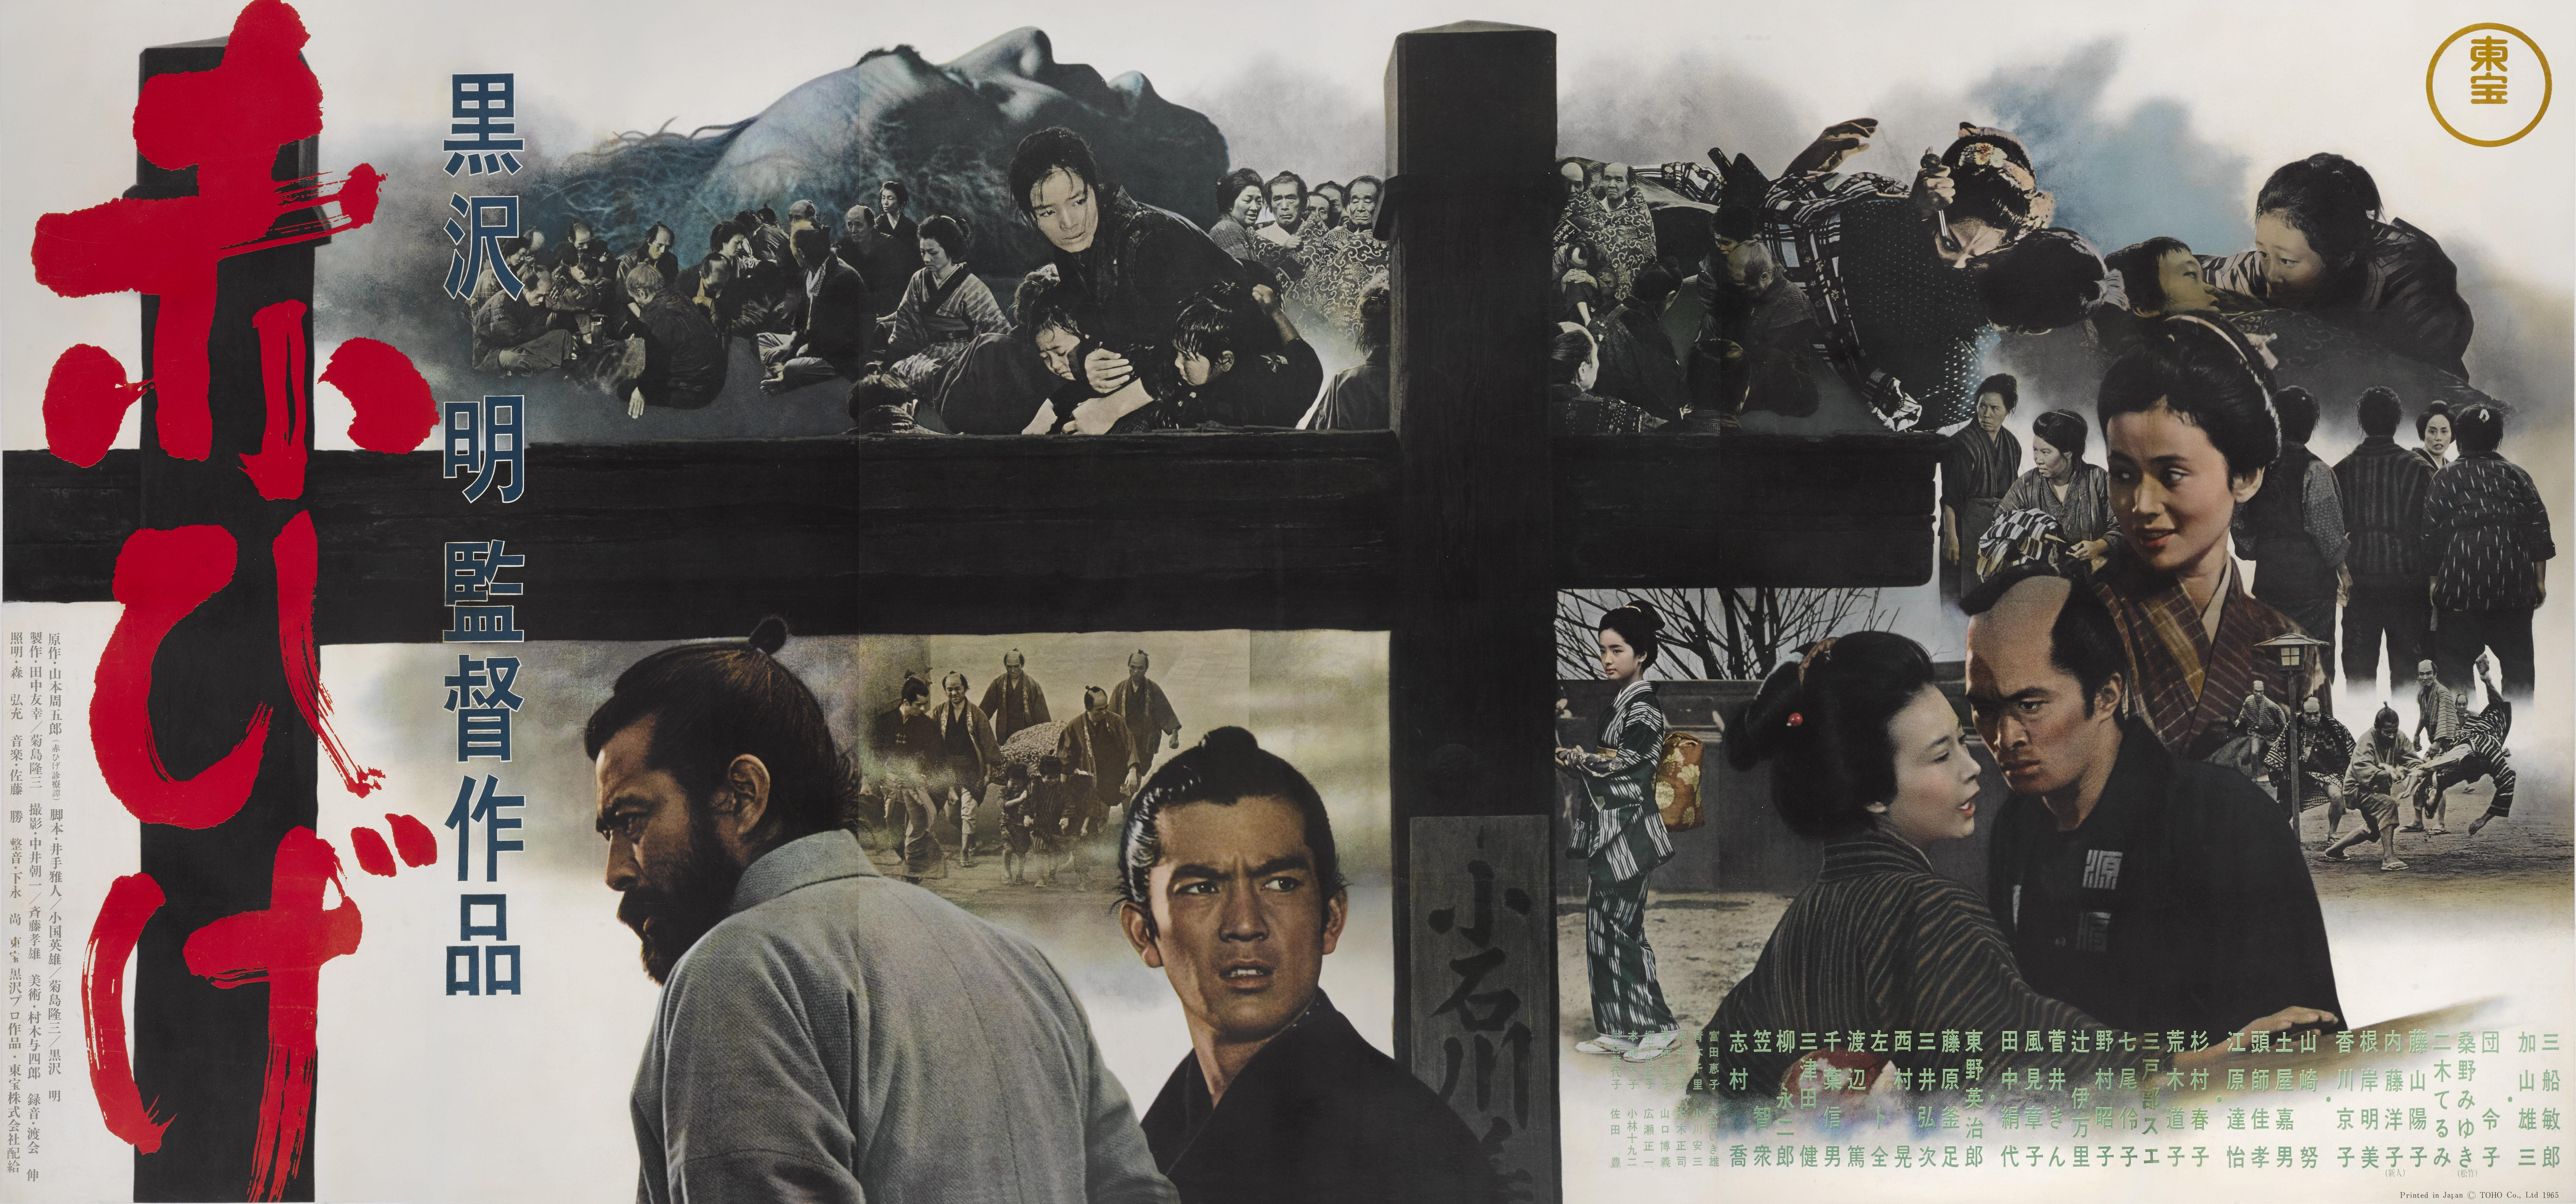 Original Japanese film poster the 1965
This Japanese film was directed by Akira Kurosawa, and stars Toshirô Mifune, Yûzô Kayama and Tsutomu Yamazaki. It focuses on the relationship between a doctor and his new trainee. These large Japanese